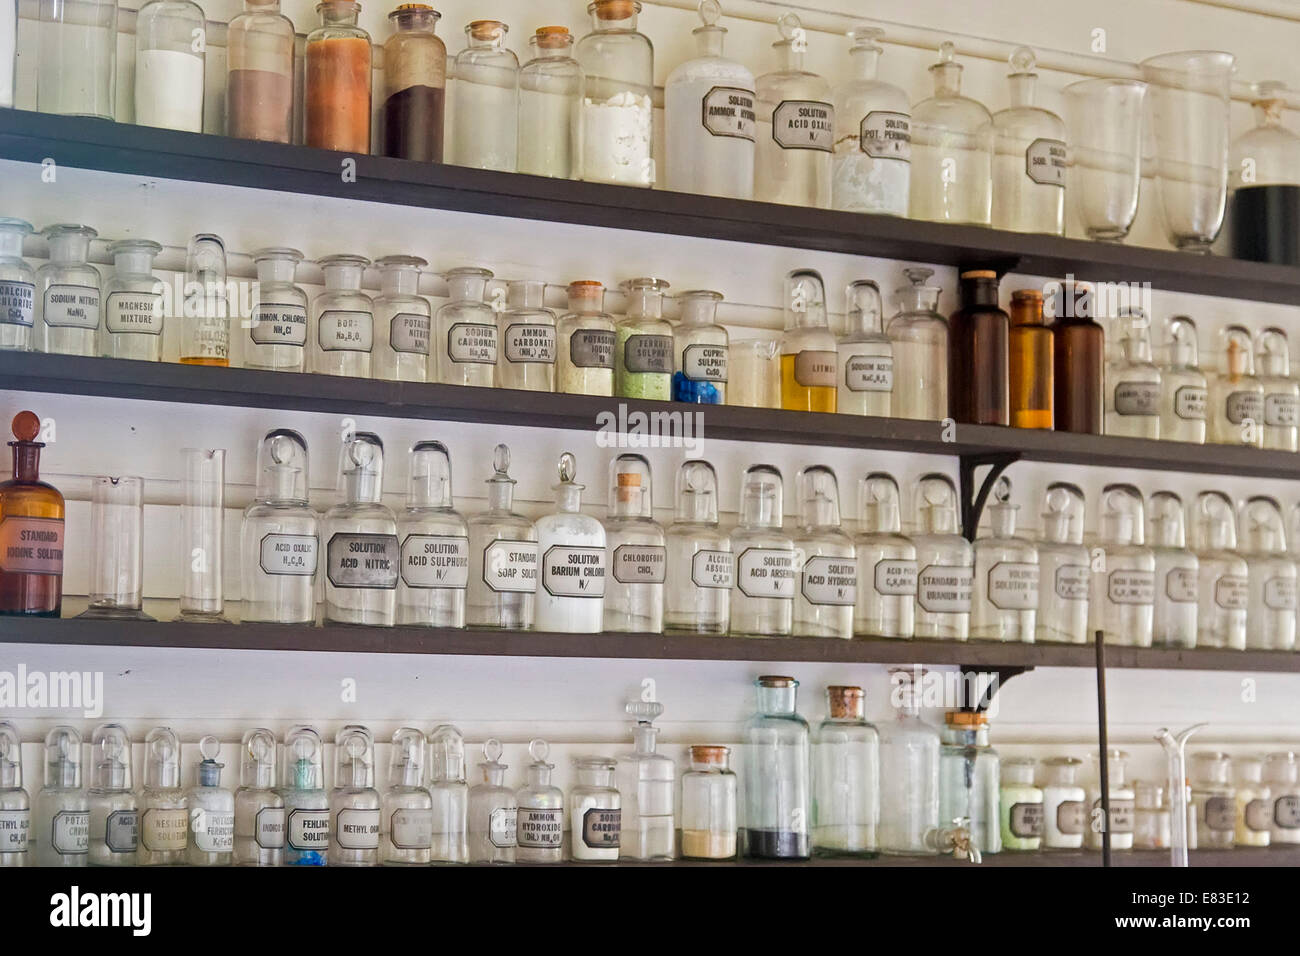 Dearborn, Michigan - Chemical bottles on the shelves in Thomas Edison's Menlo Park laboratory at Greenfield Village. Stock Photo